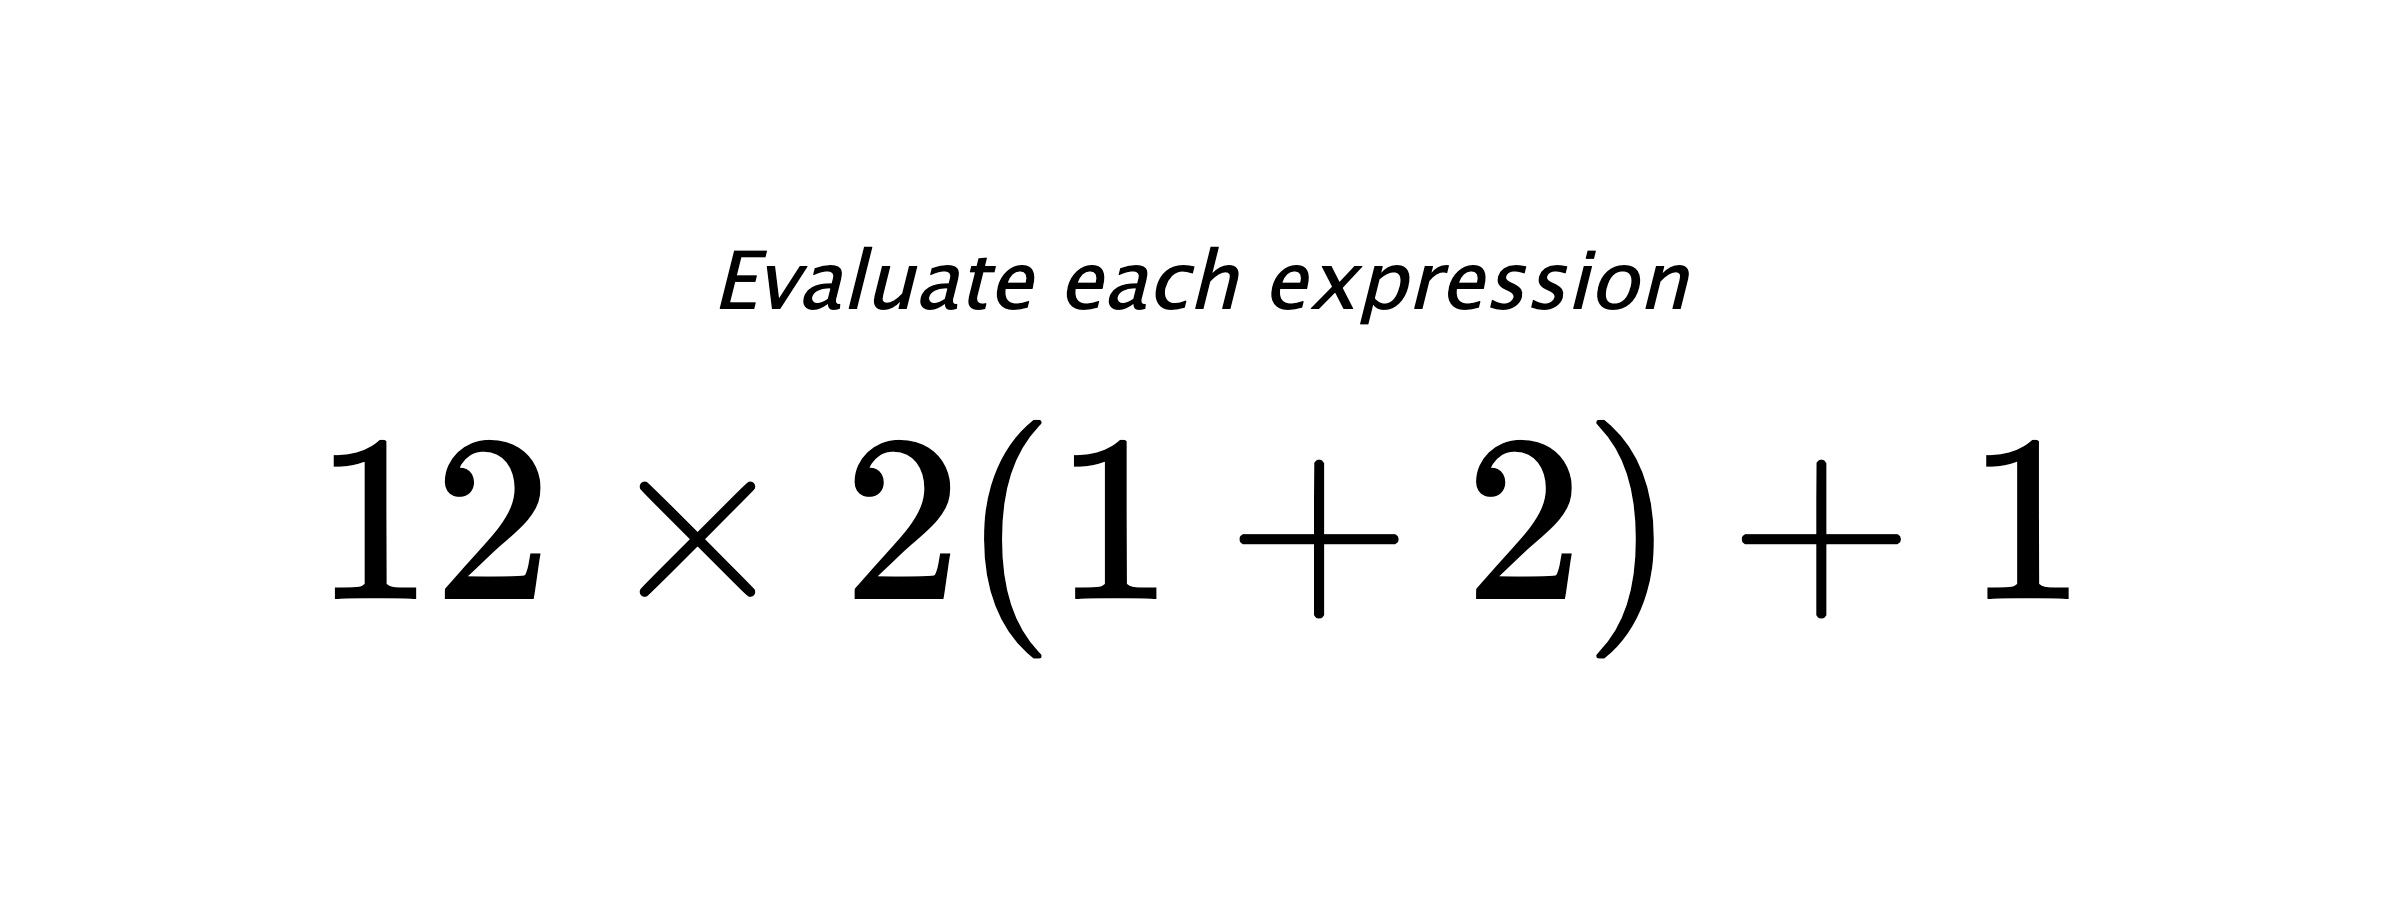 Evaluate each expression $ 12 \times 2(1+2) +1 $